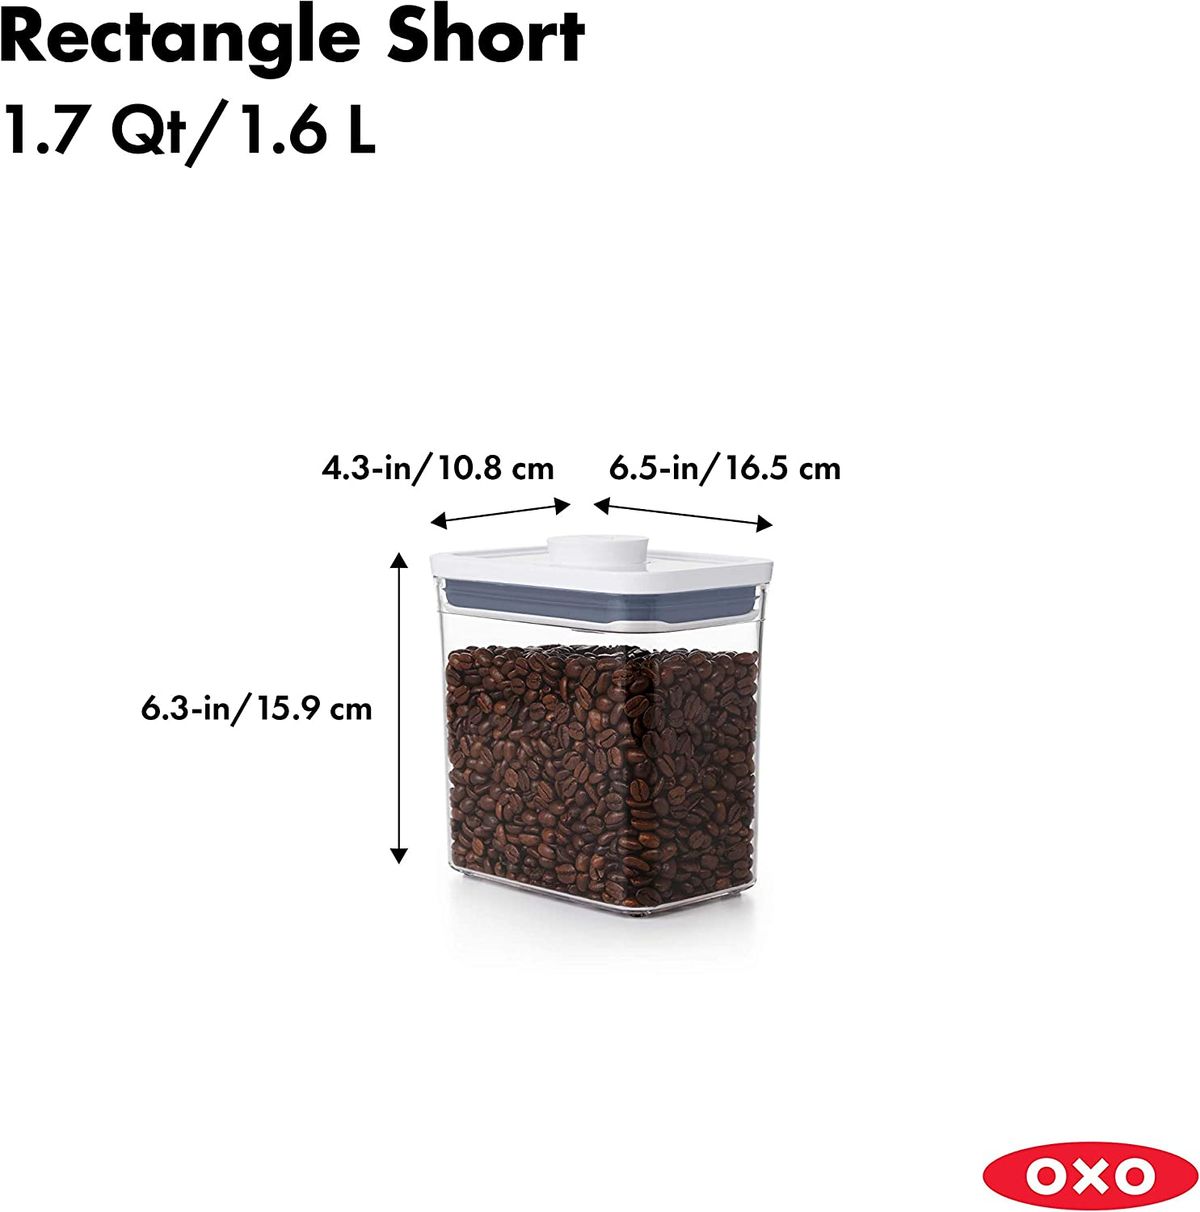 OXO Steel POP Rectangle Short 1.7-Qt. Food Storage Container